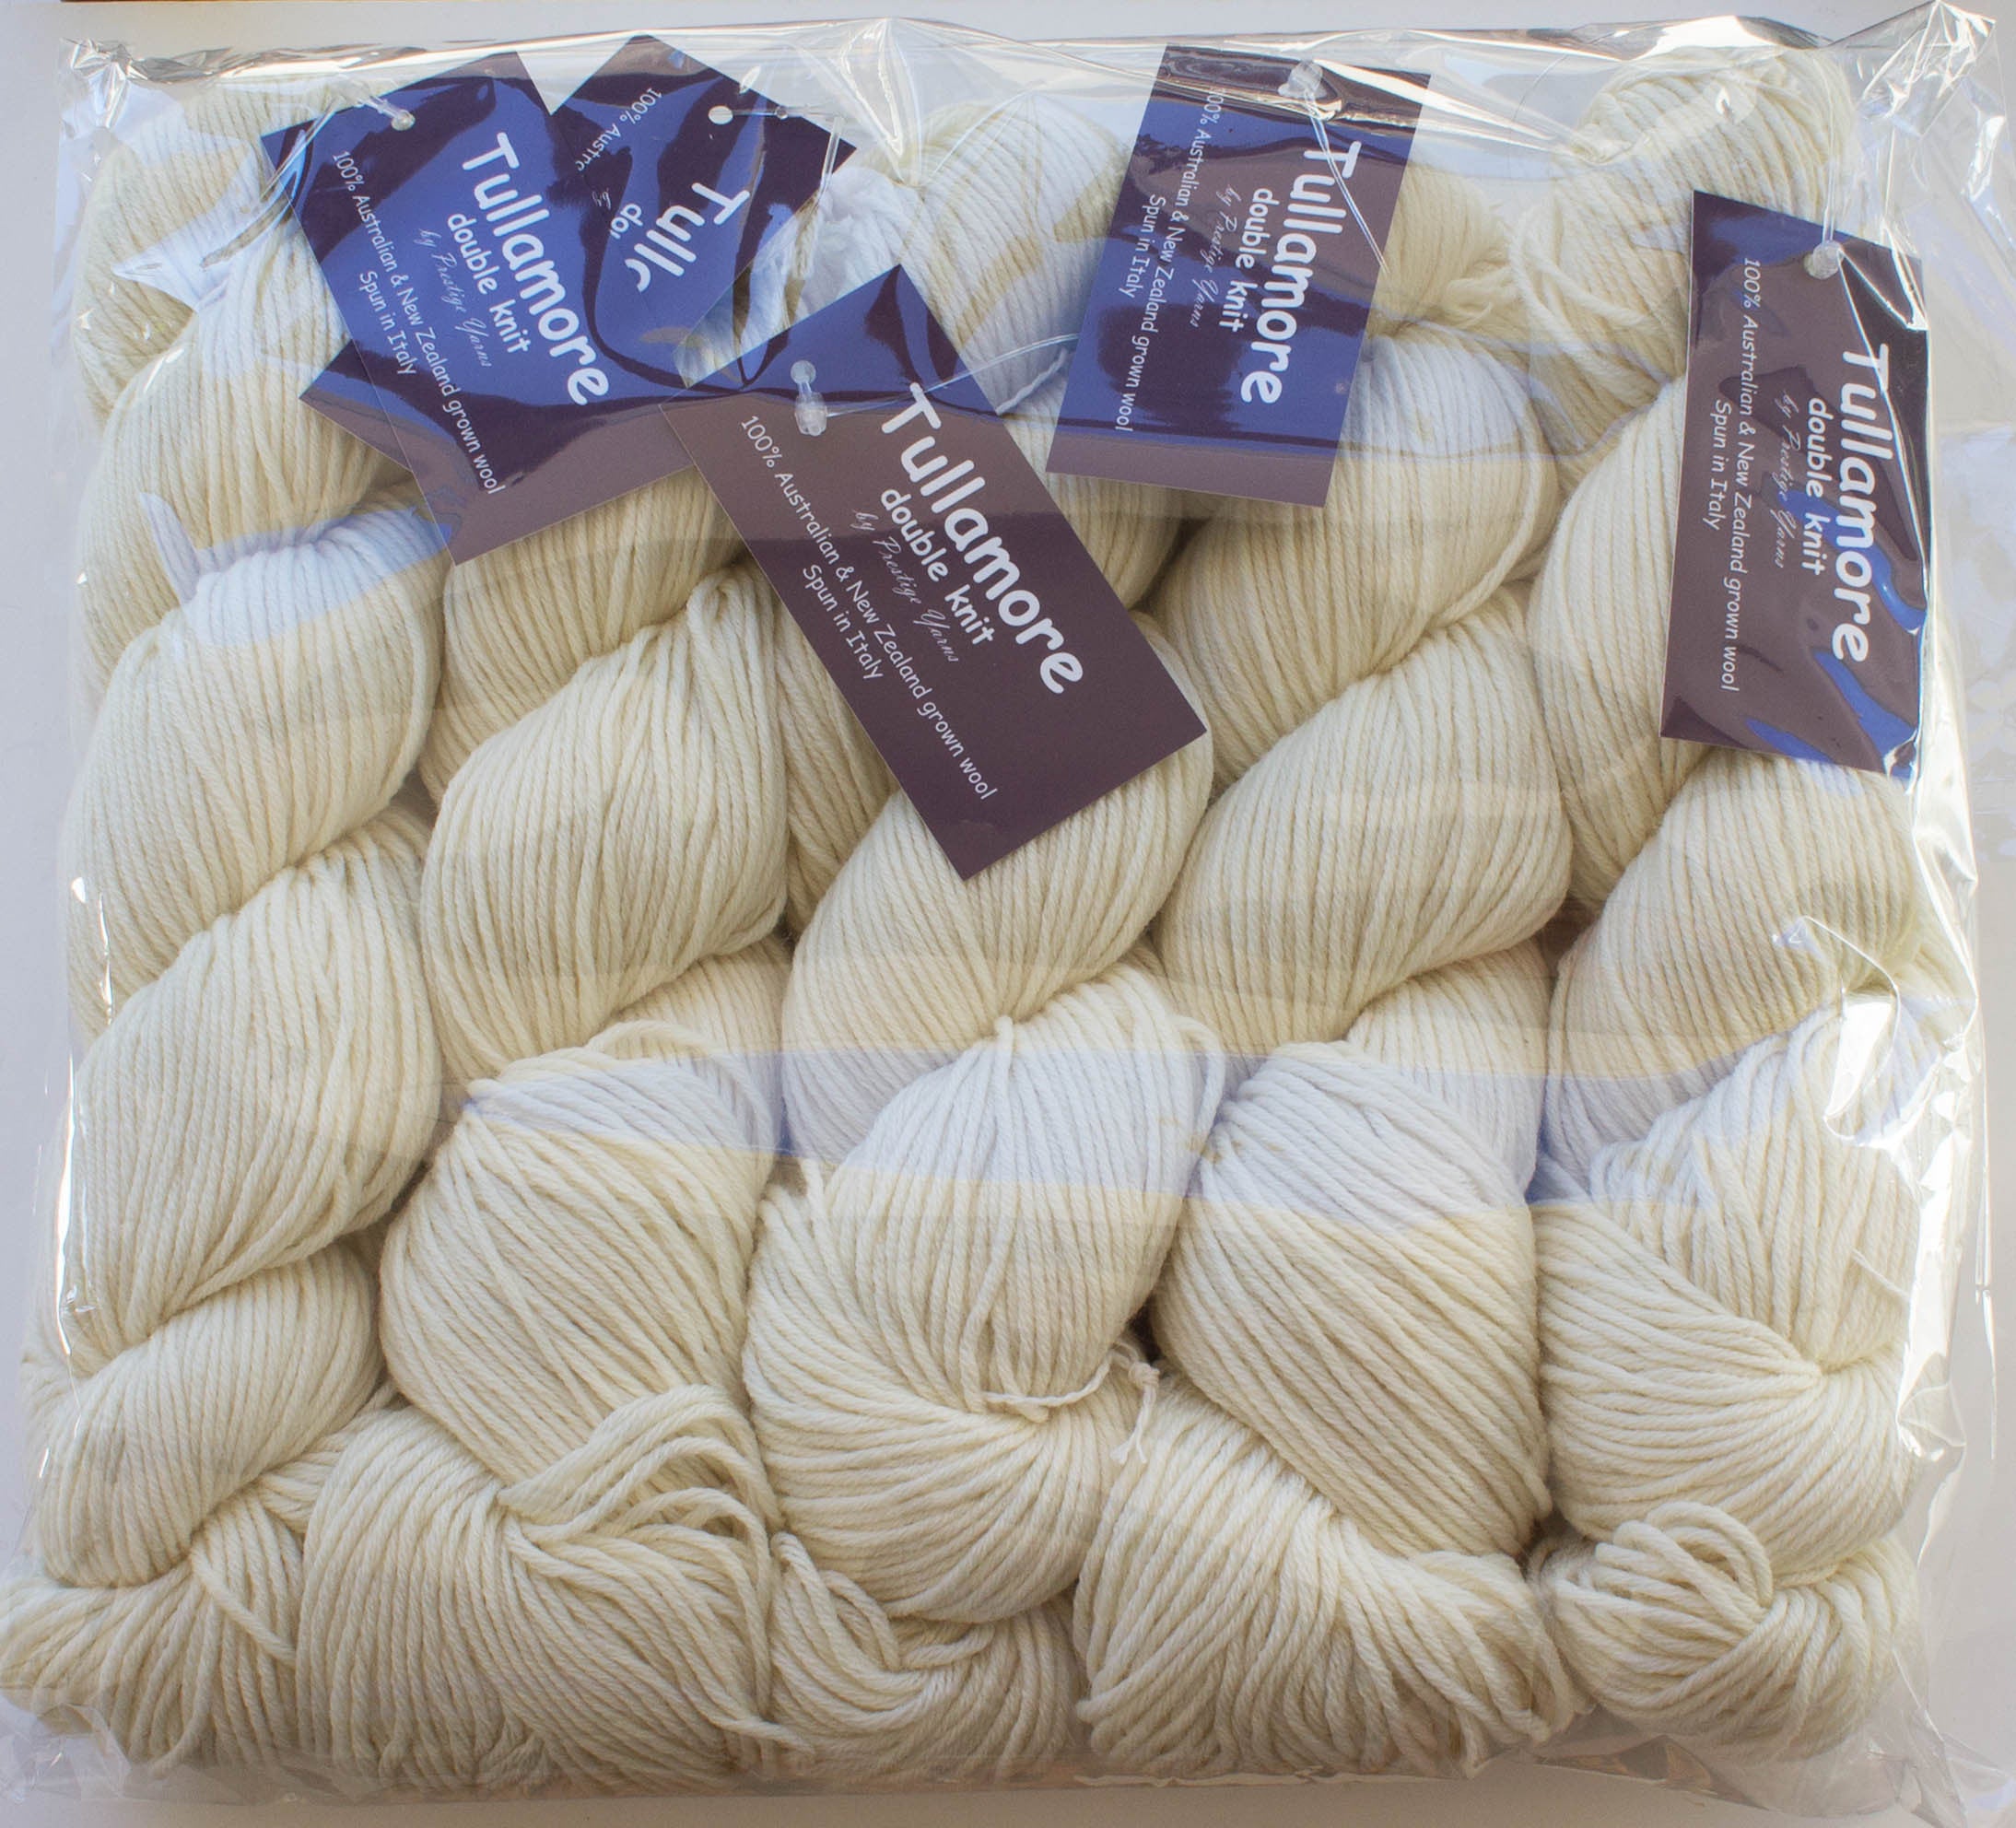 TULLAMORE Natural/Undyed  8-Ply Fabulous for Dyeing100g Skein 100% AU & NZ Fine Merino